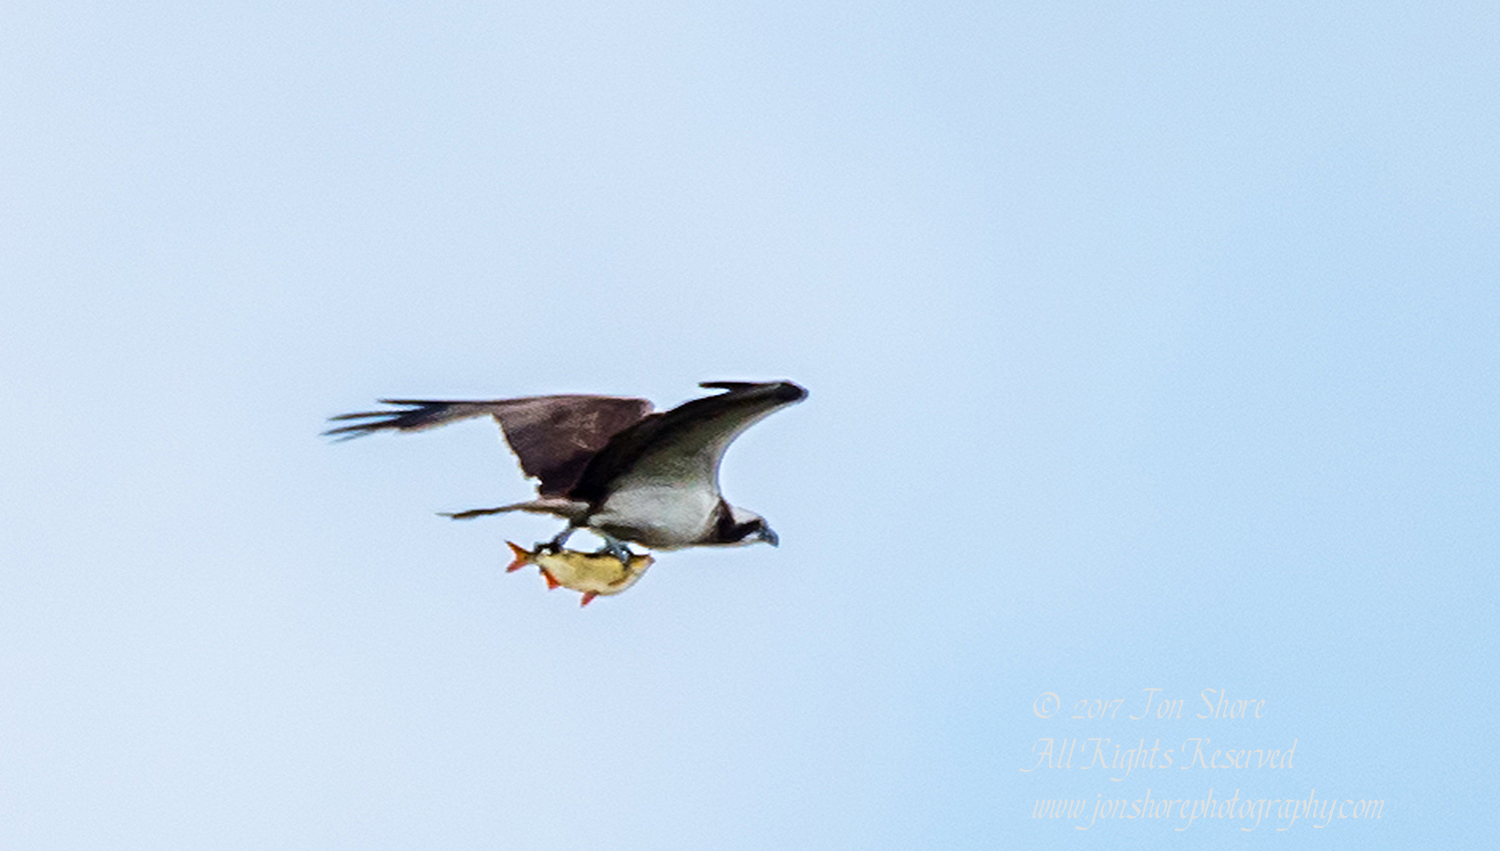 Osprey with fish. Tamron 600mm